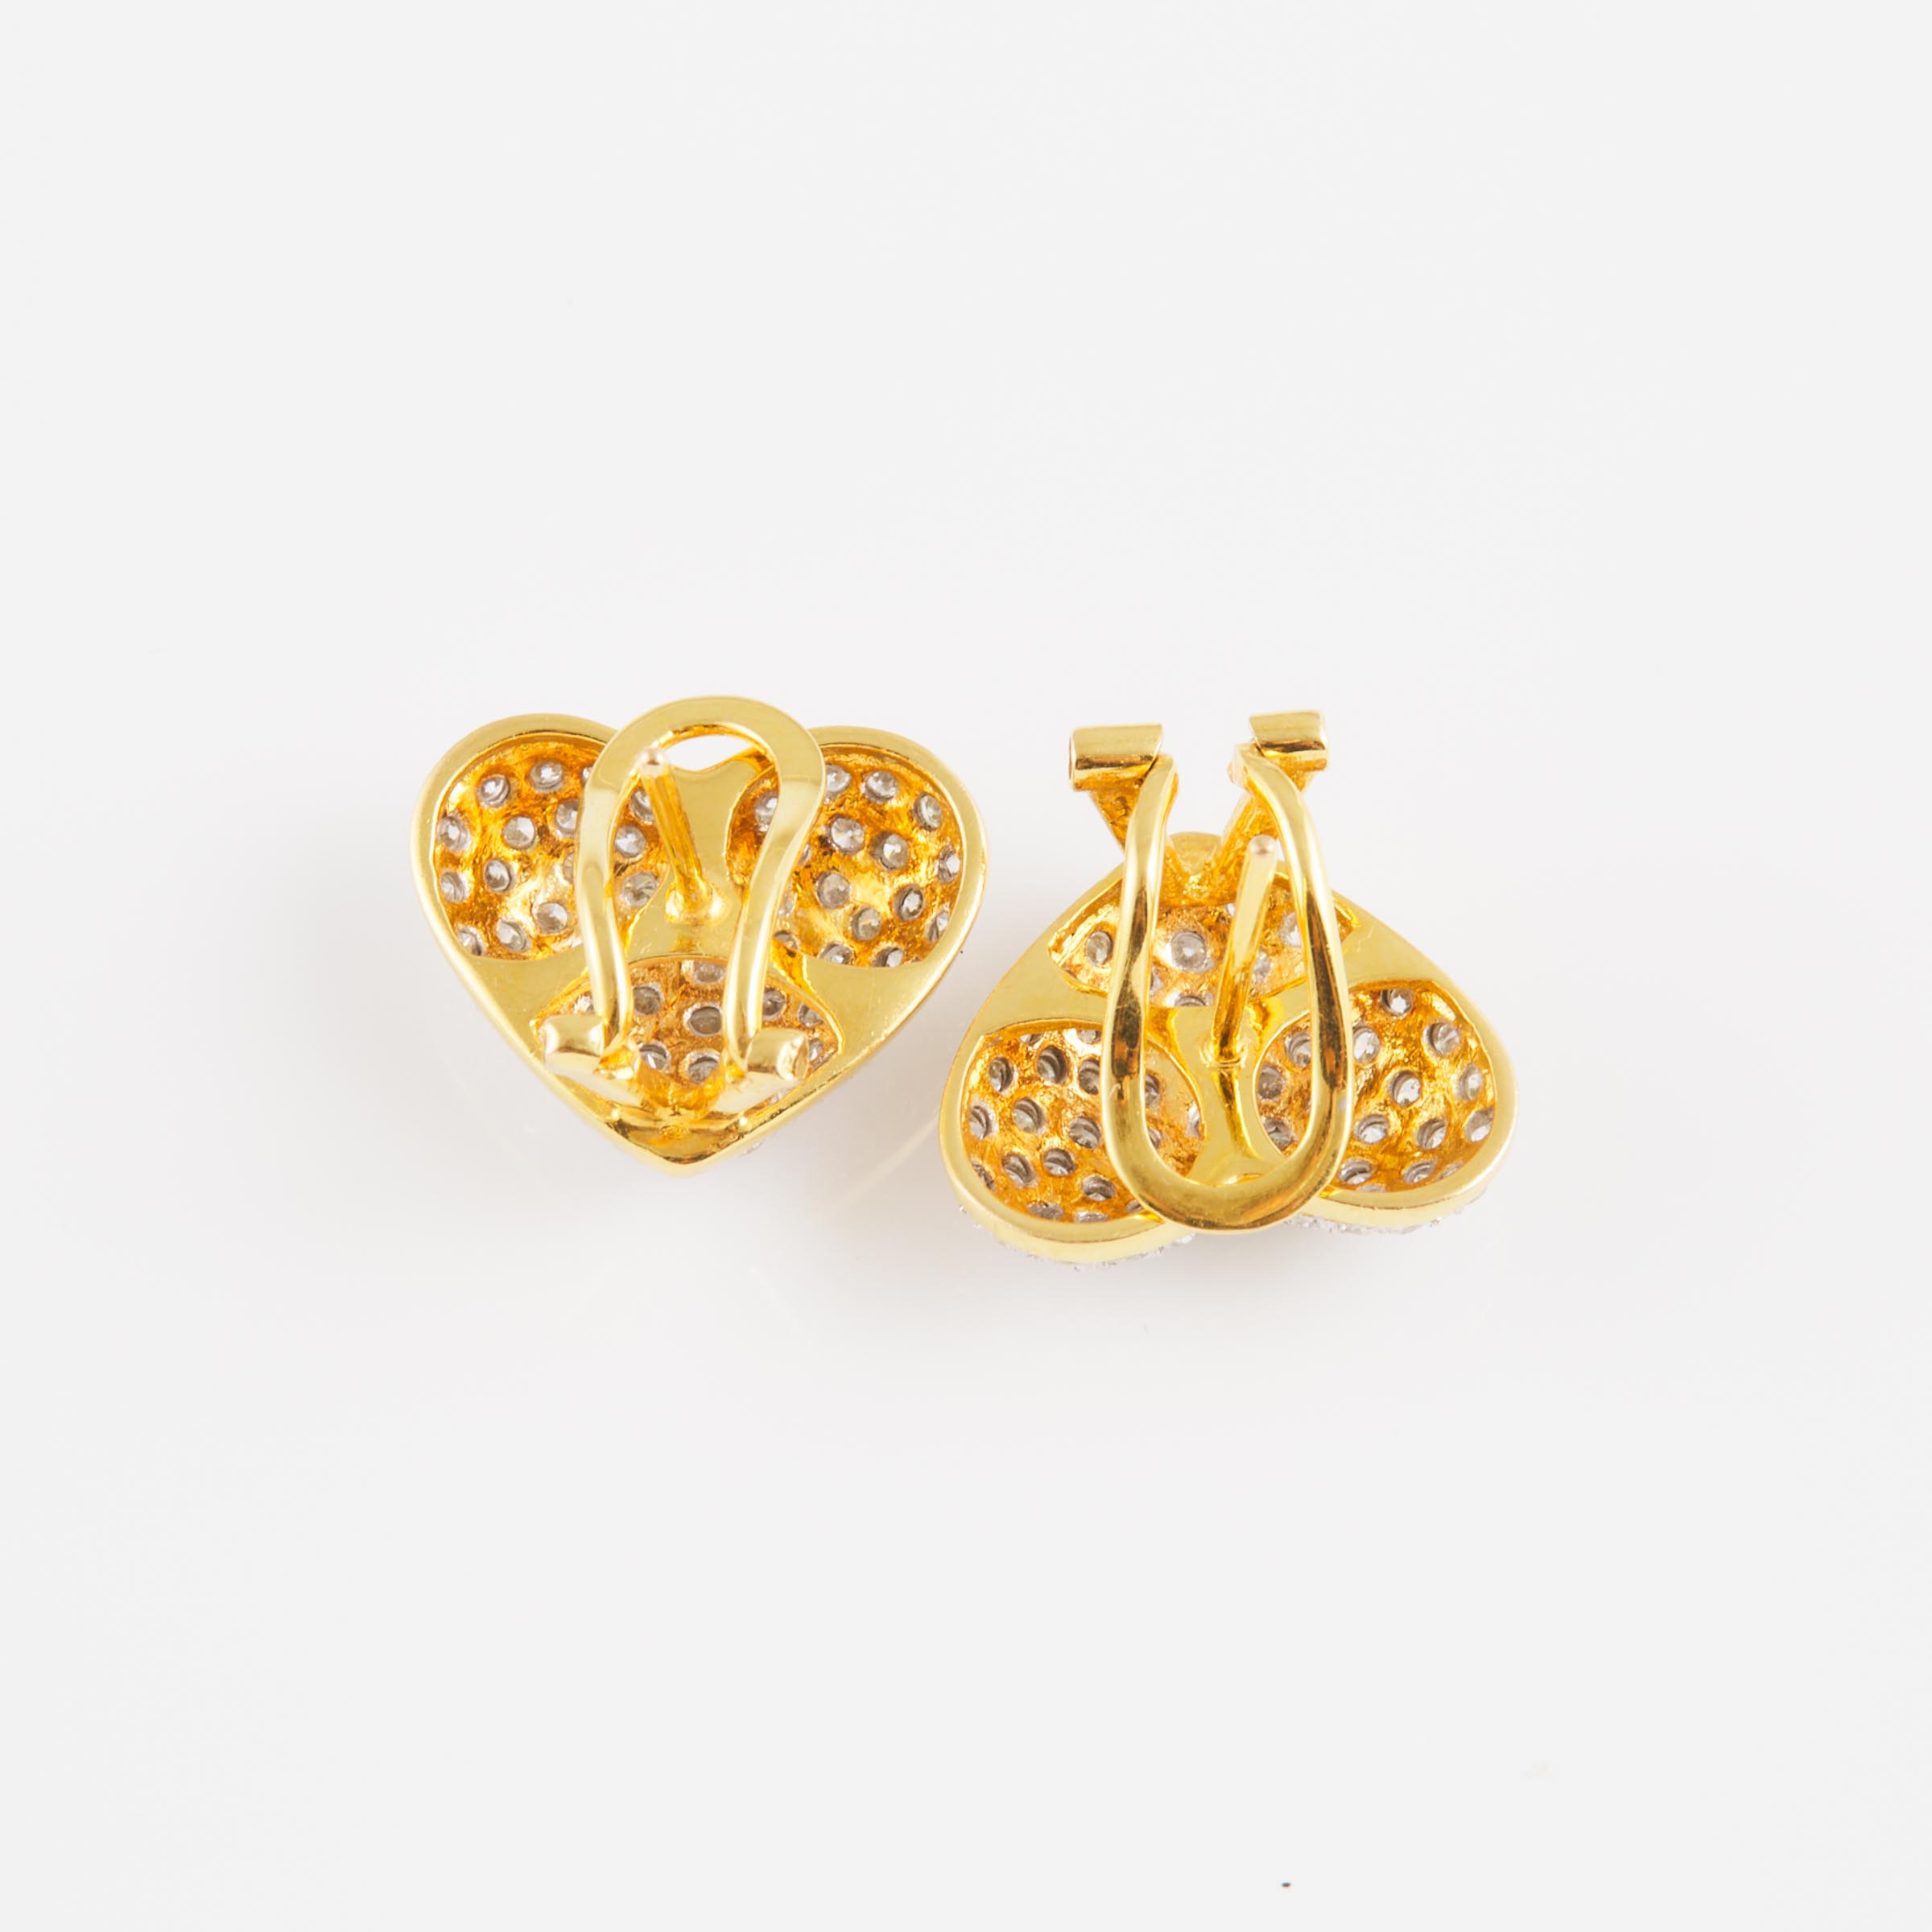 Pair Of 18k Yellow And White Gold Heart Earrings